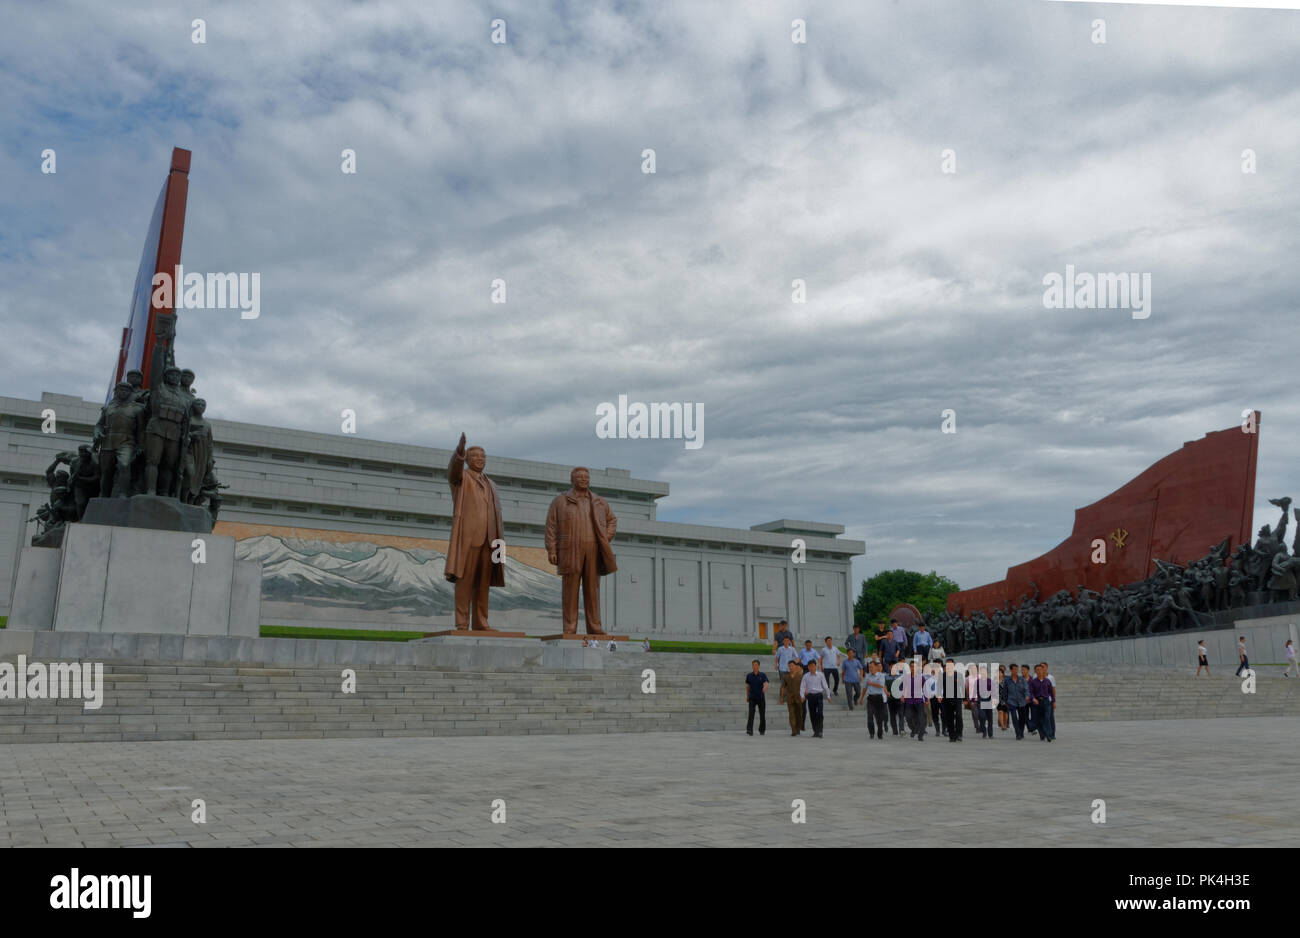 North Korea, the Mansudae Hill Grand Monument, statues of Kim Il Sung and Kim Jong Il, with mosaic of  Paekdu Mountain behind.with tourists visitors Stock Photo